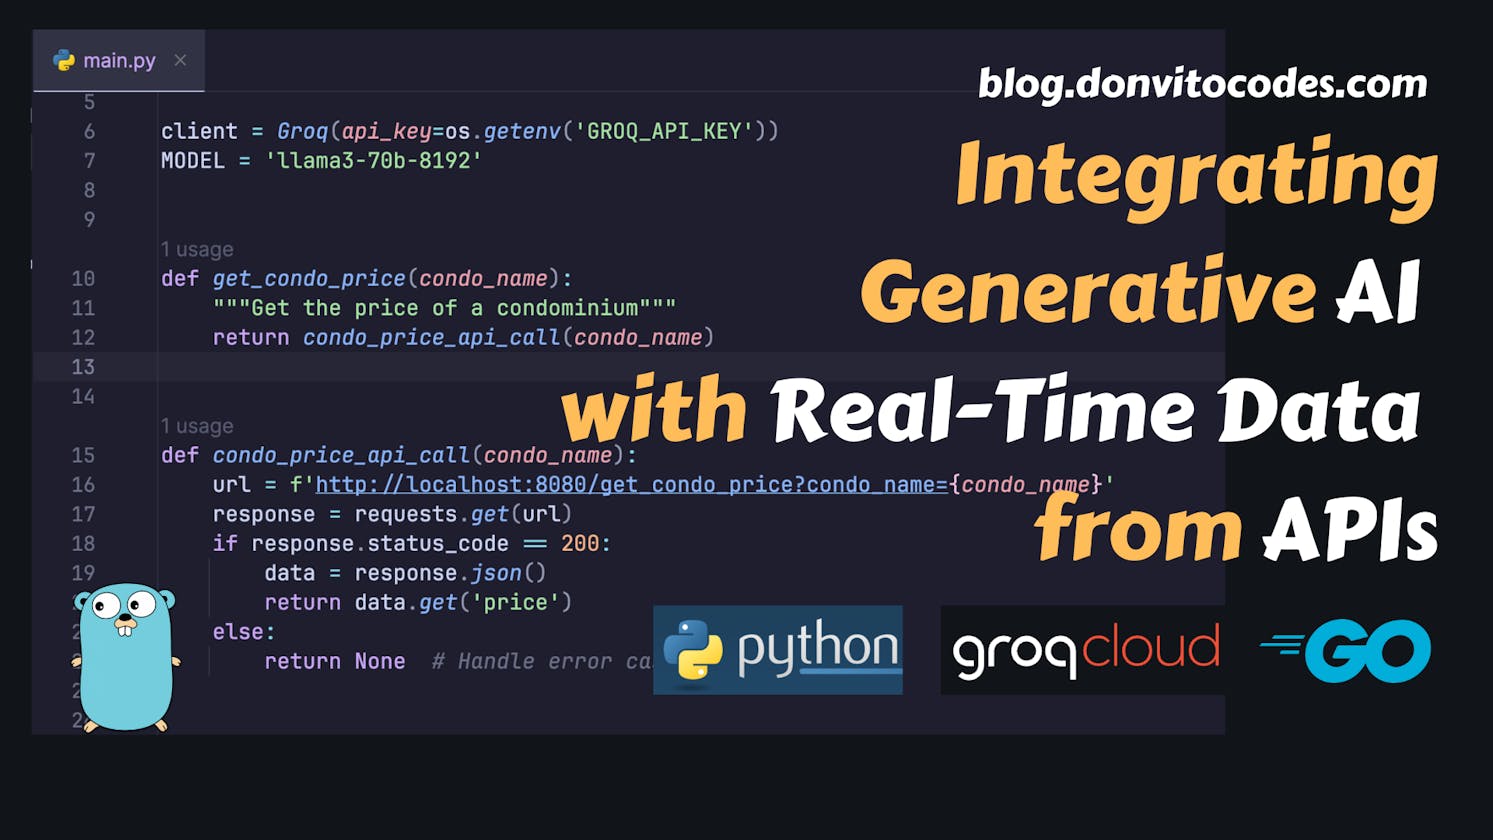 Integrating Generative AI with Real-Time Data from APIs - Groq, Python and Go